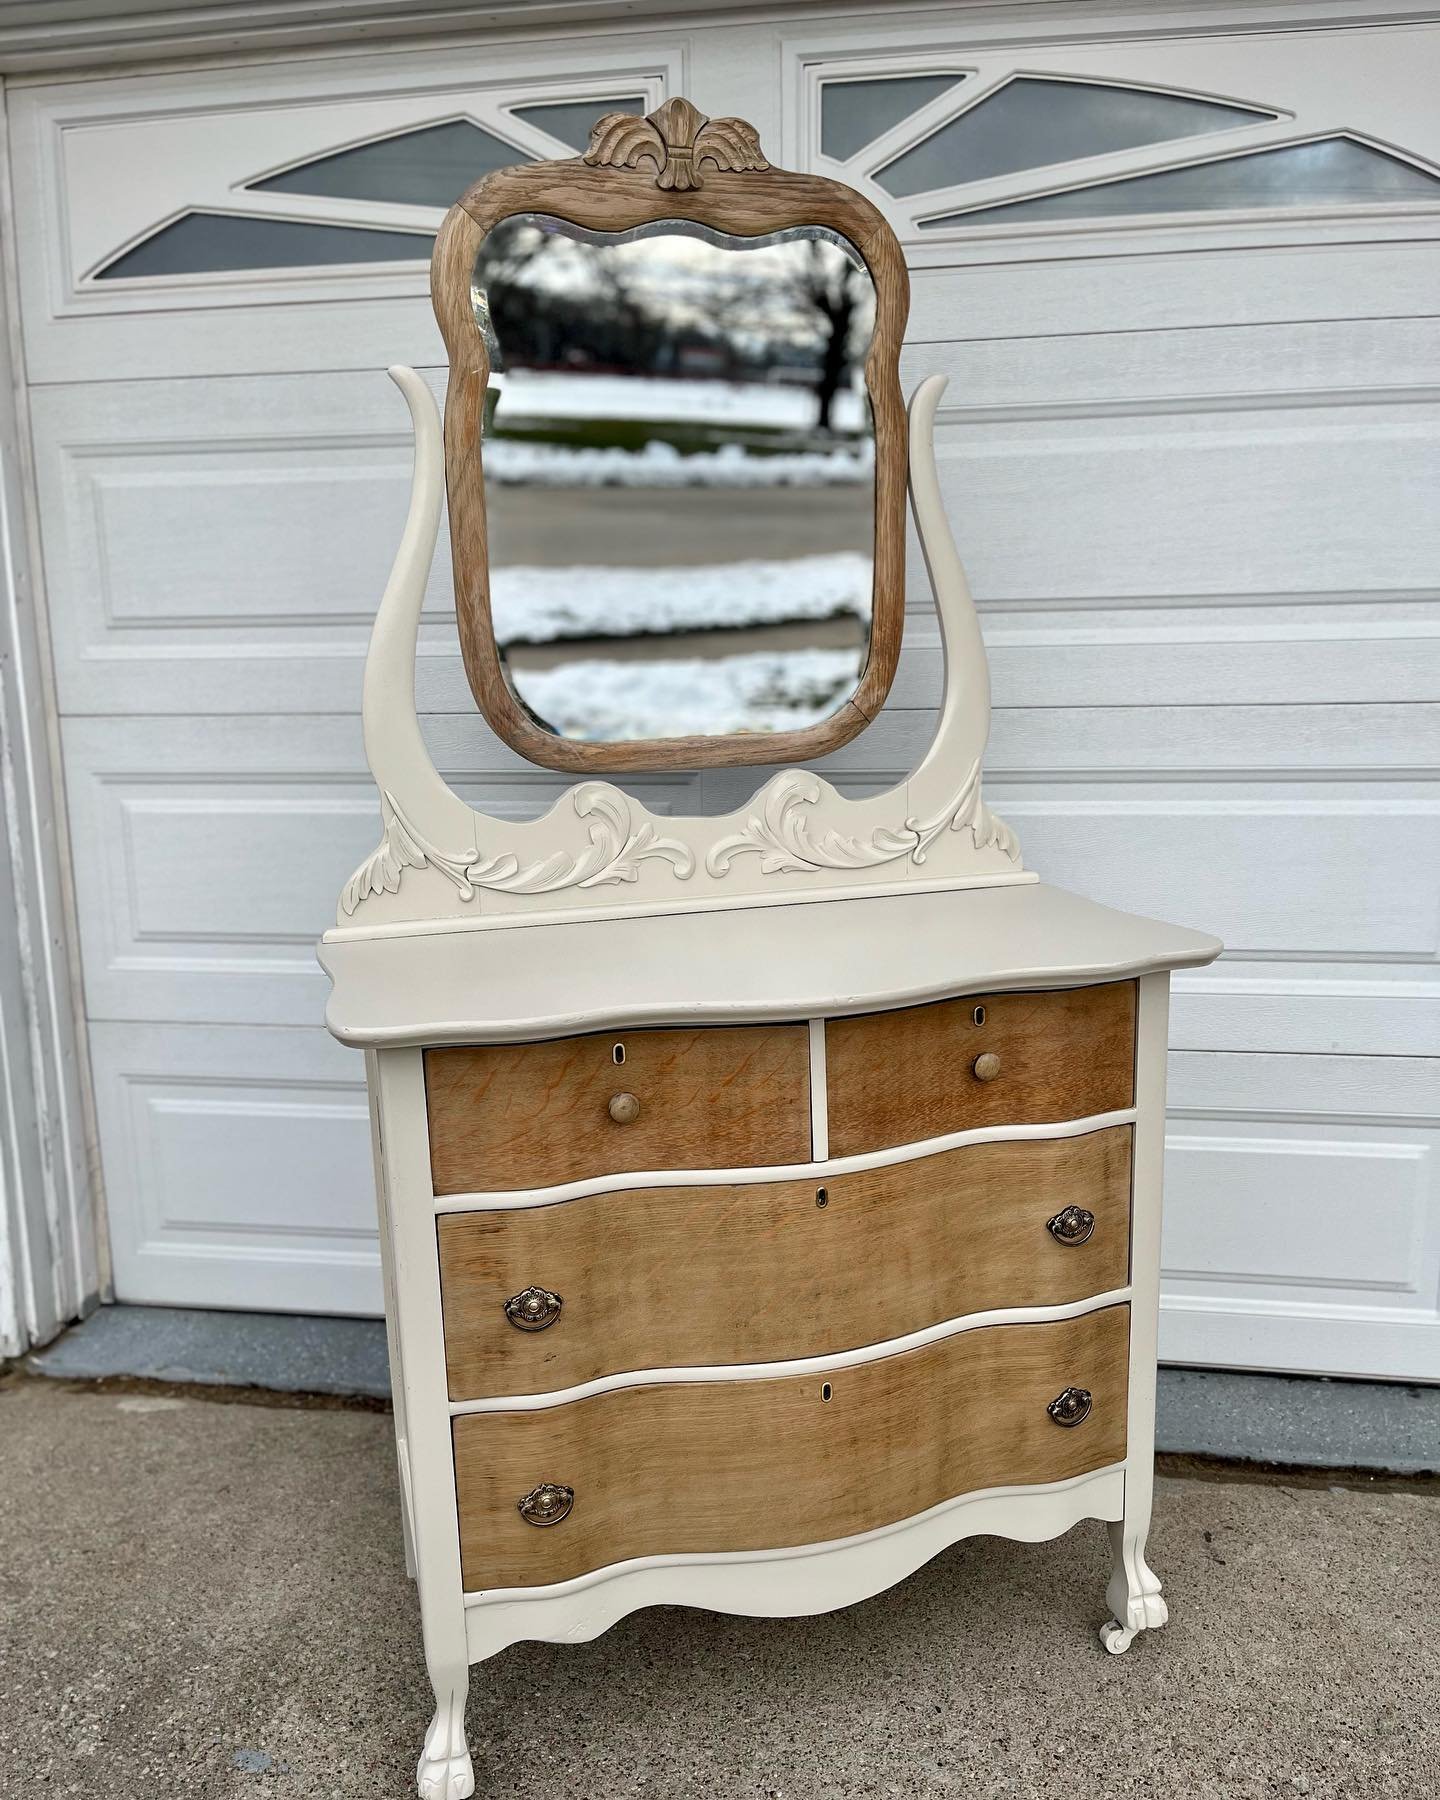 This antique family heirloom dresser set is flipped &amp; done!

My customer wanted a warm gray and a natural wood wash look, with a mix of wood and vintage metal handles and coordinated lined drawers. 

I prepped, cleaned and sanded this, used my sp